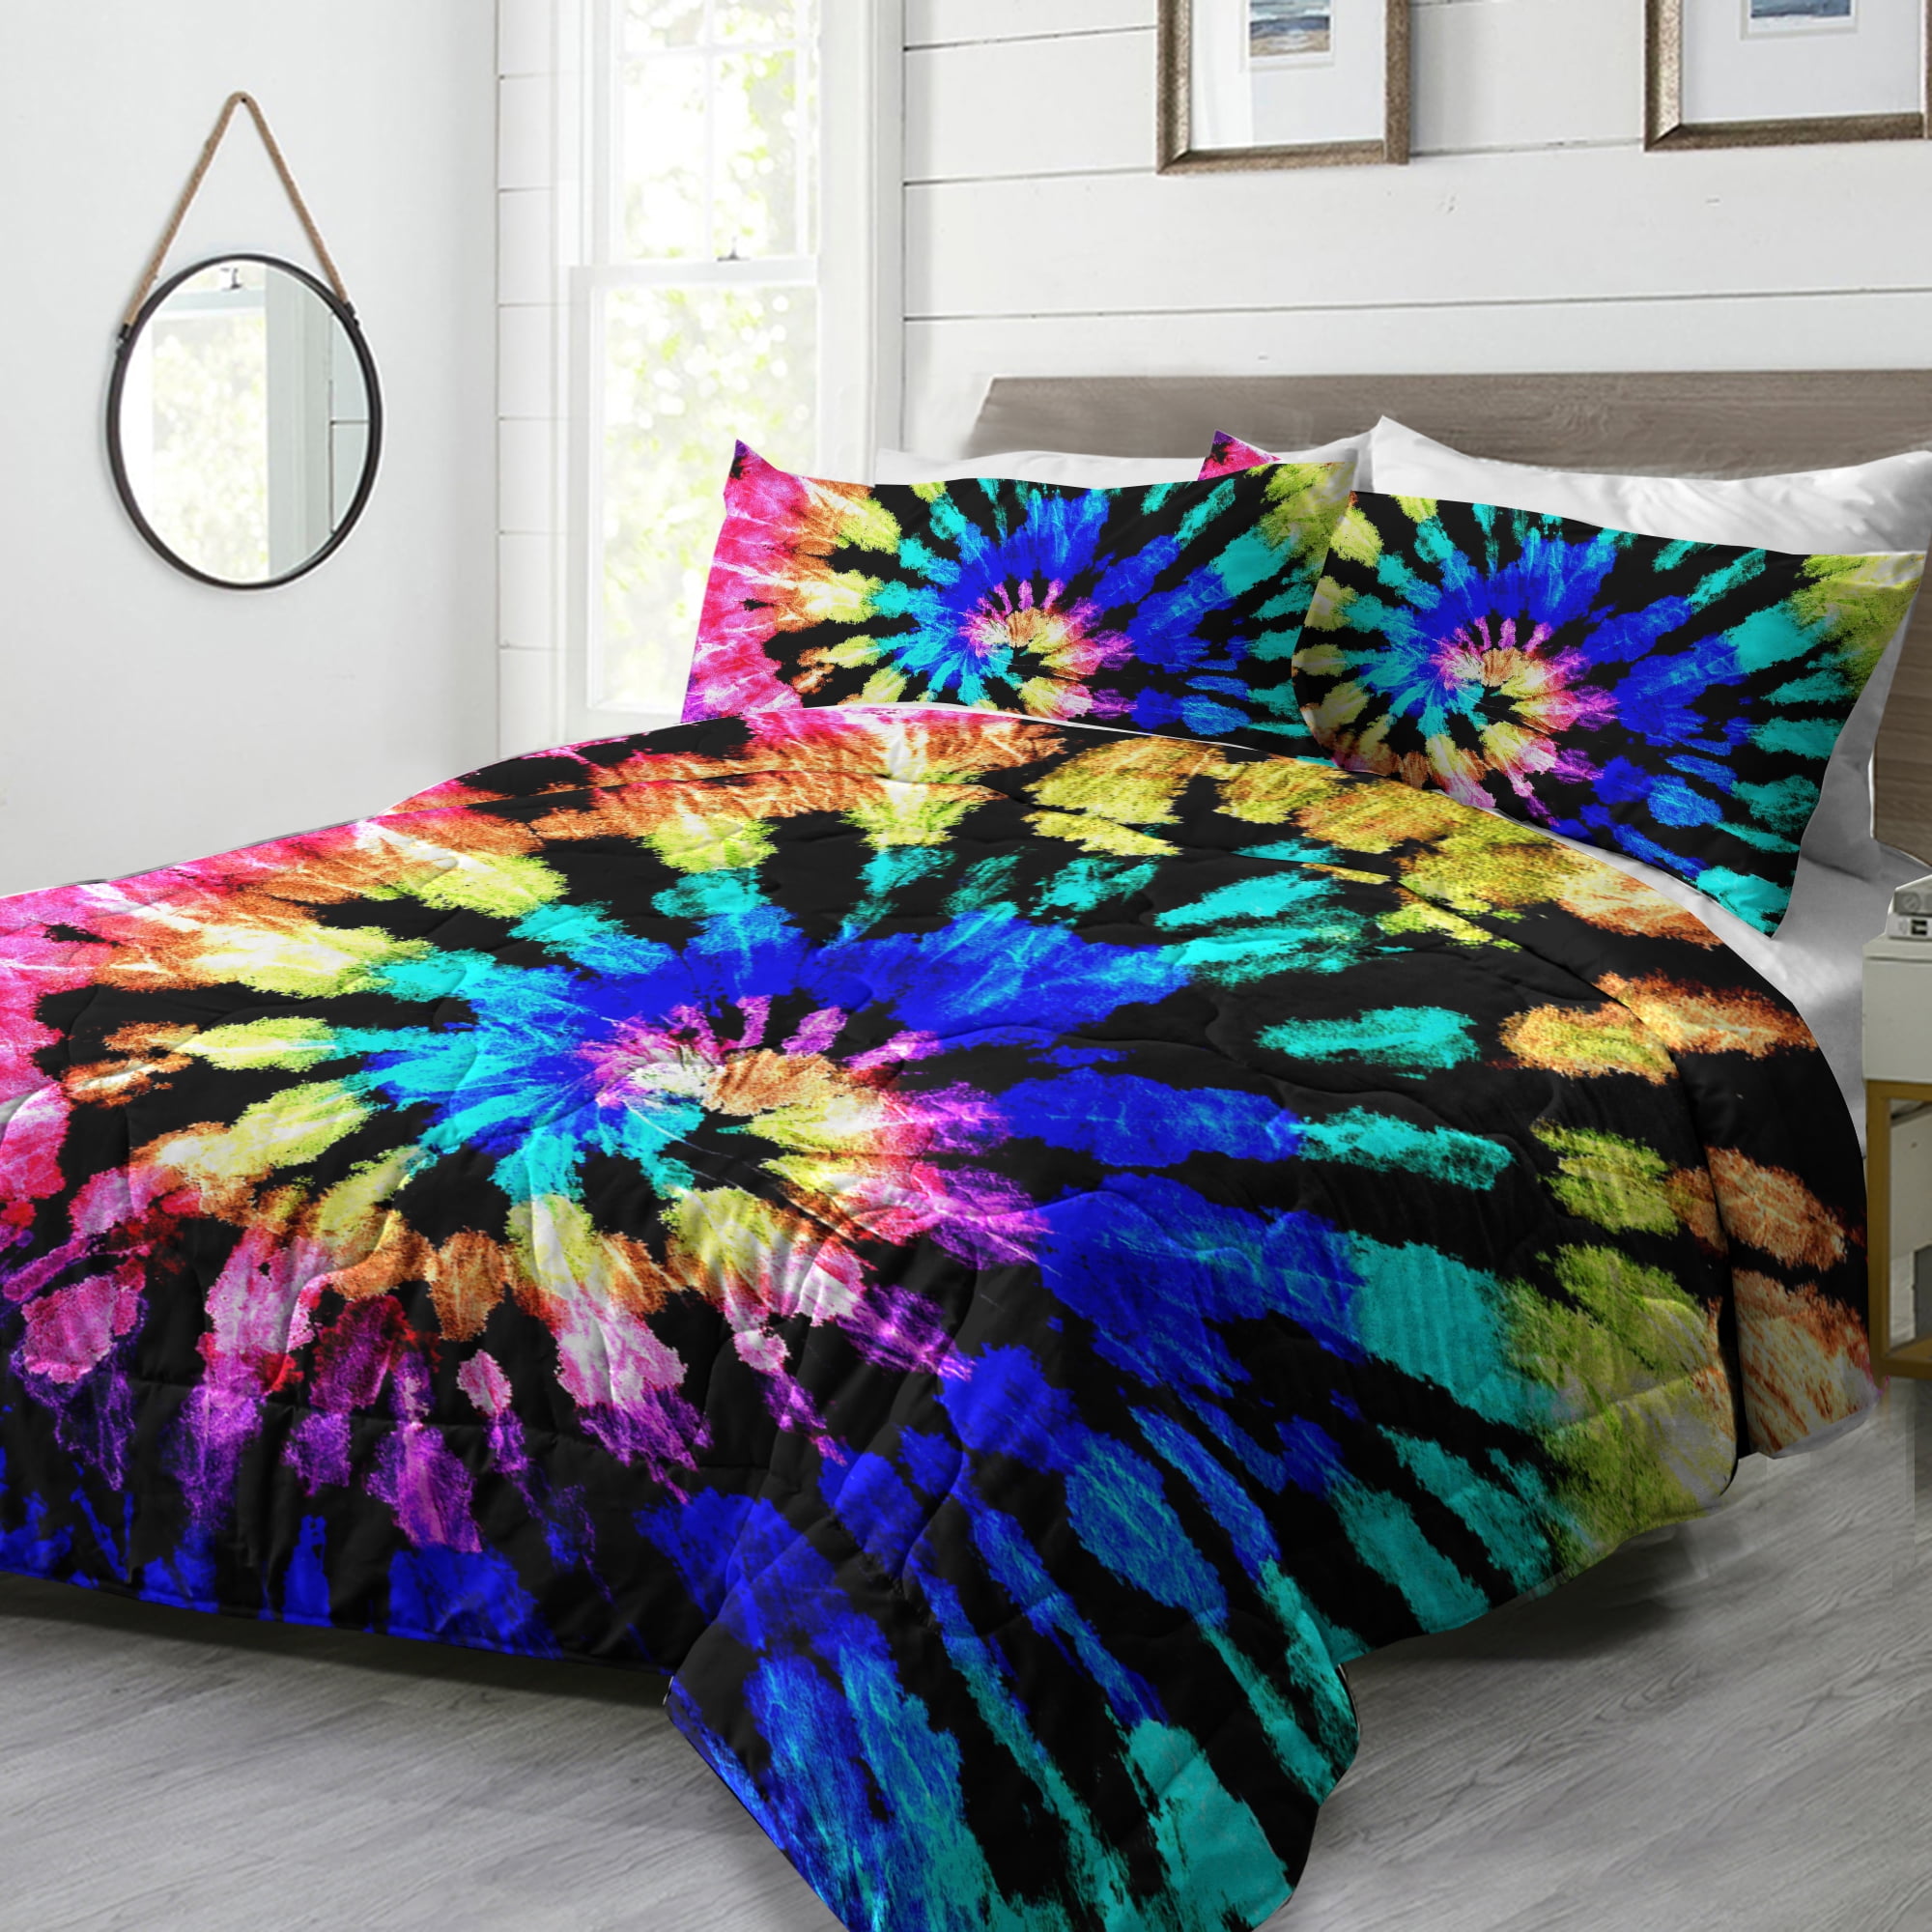 HipBee Tie Dye Bedding Sets Queen Size,3 Piece Soft Blue Psychedelic Art Tie Dyed Duvet Cover Set for Teens Boys Girls,NO Comforter